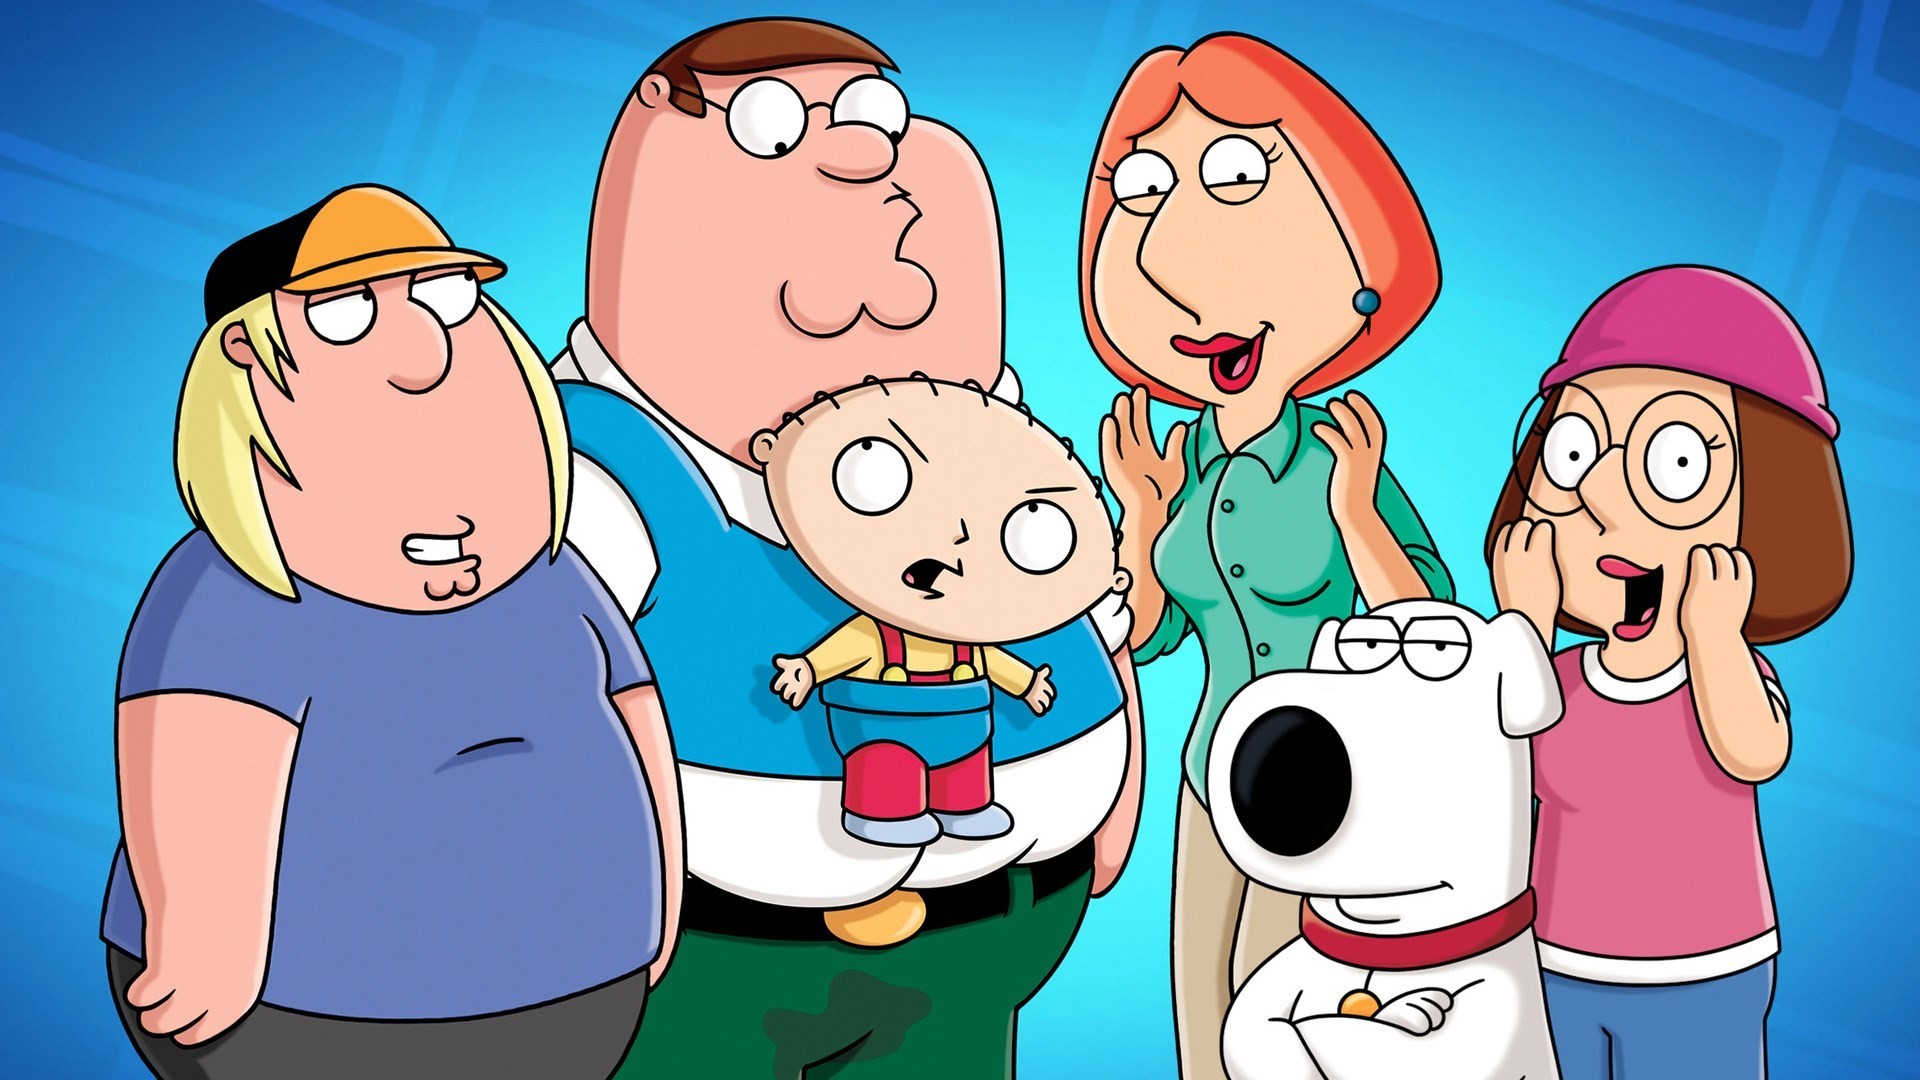 1920x1080  free computer wallpaper for family guy - family guy category Â·  Download Â· Preview wallpaper peter griffin, family guy ...